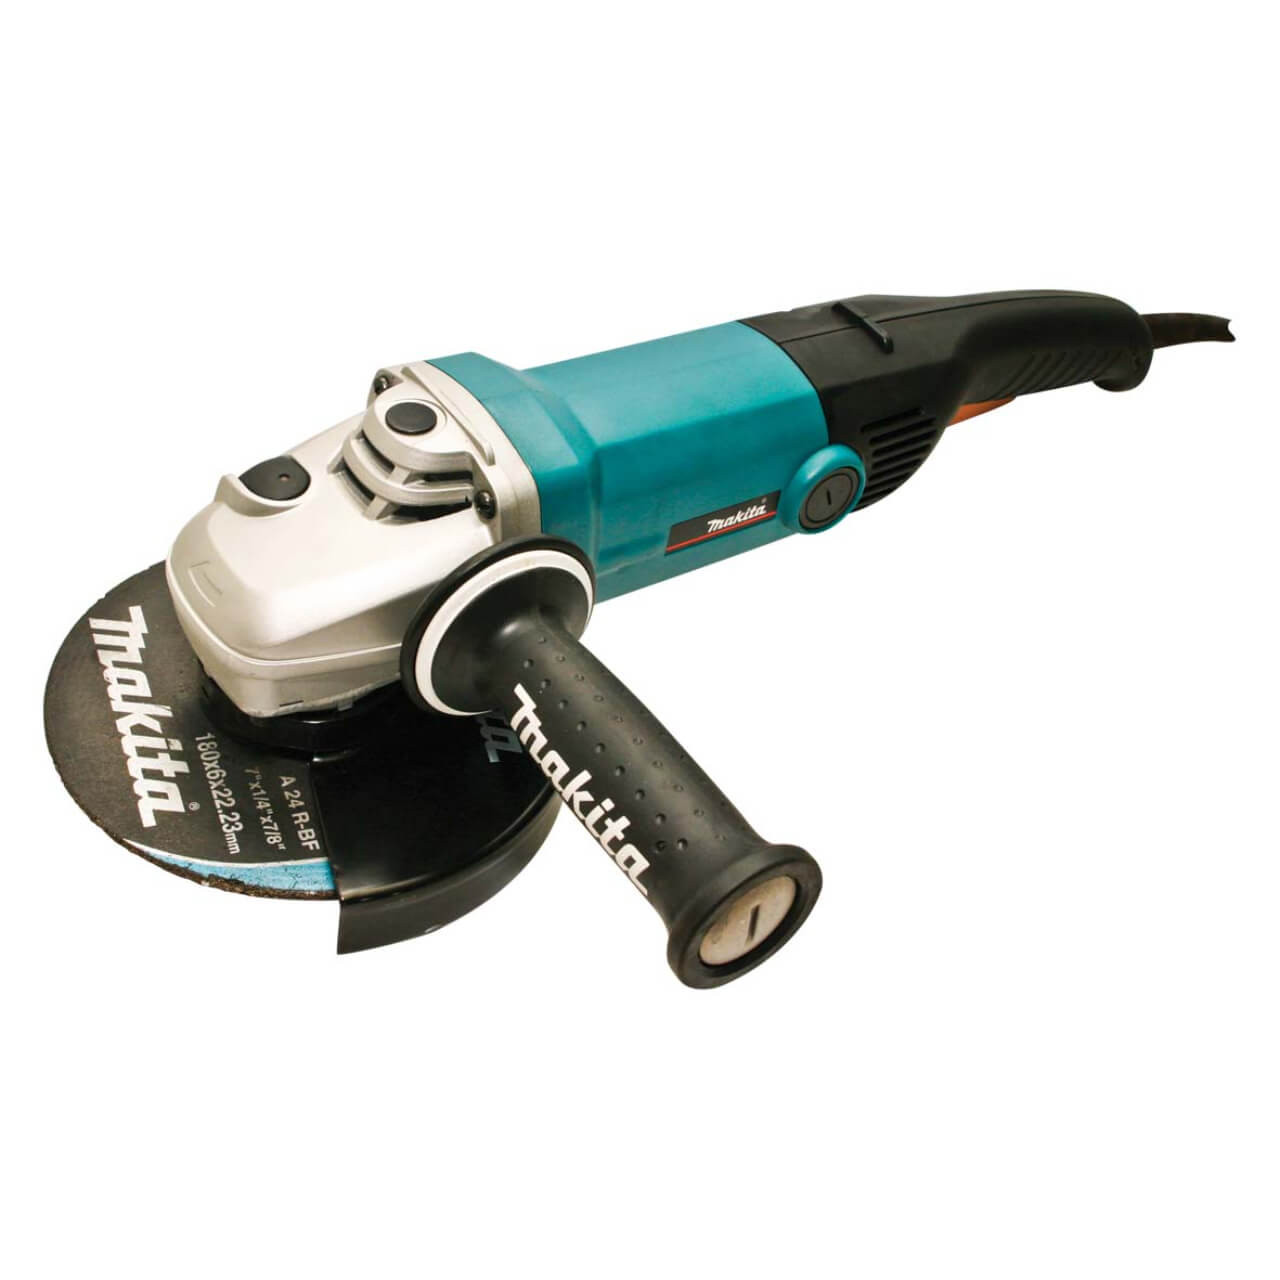 Makita 180mm (7”) Angle Grinder. 1800W. Constant Speed Control. soft start. current limiter